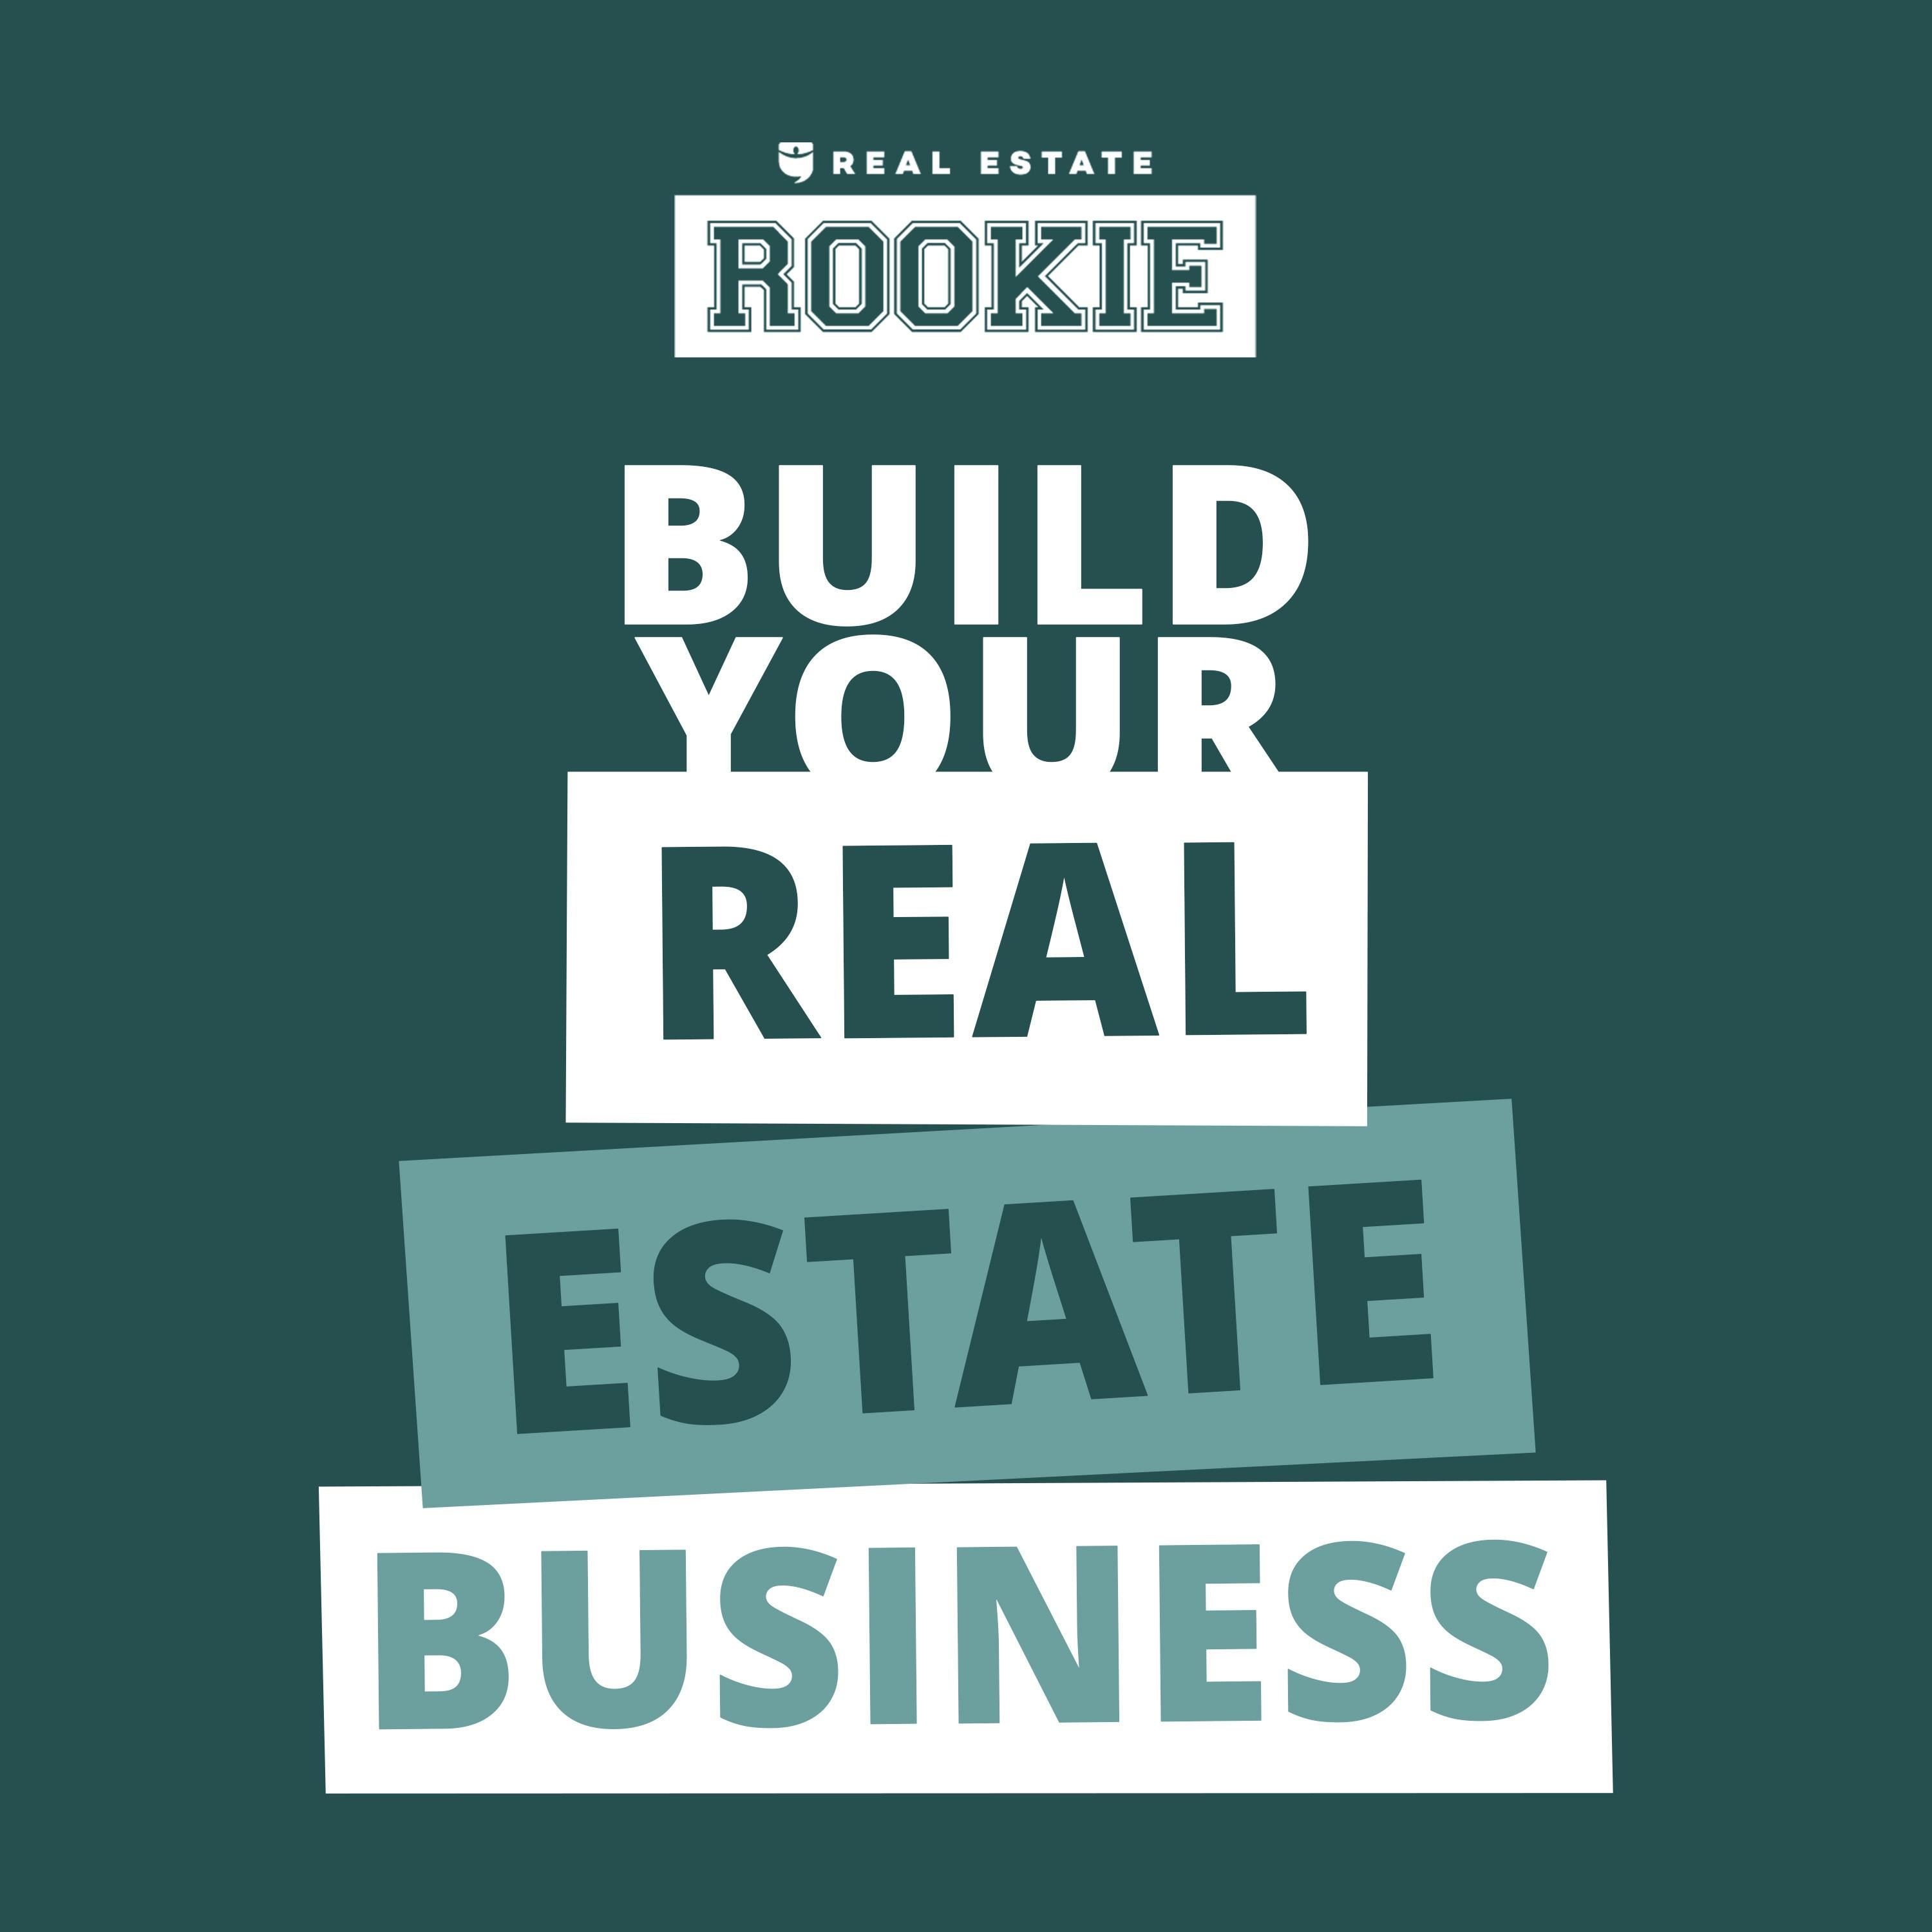 Simple Steps to Start, Scale, and Grow a Real Estate Business in 2023